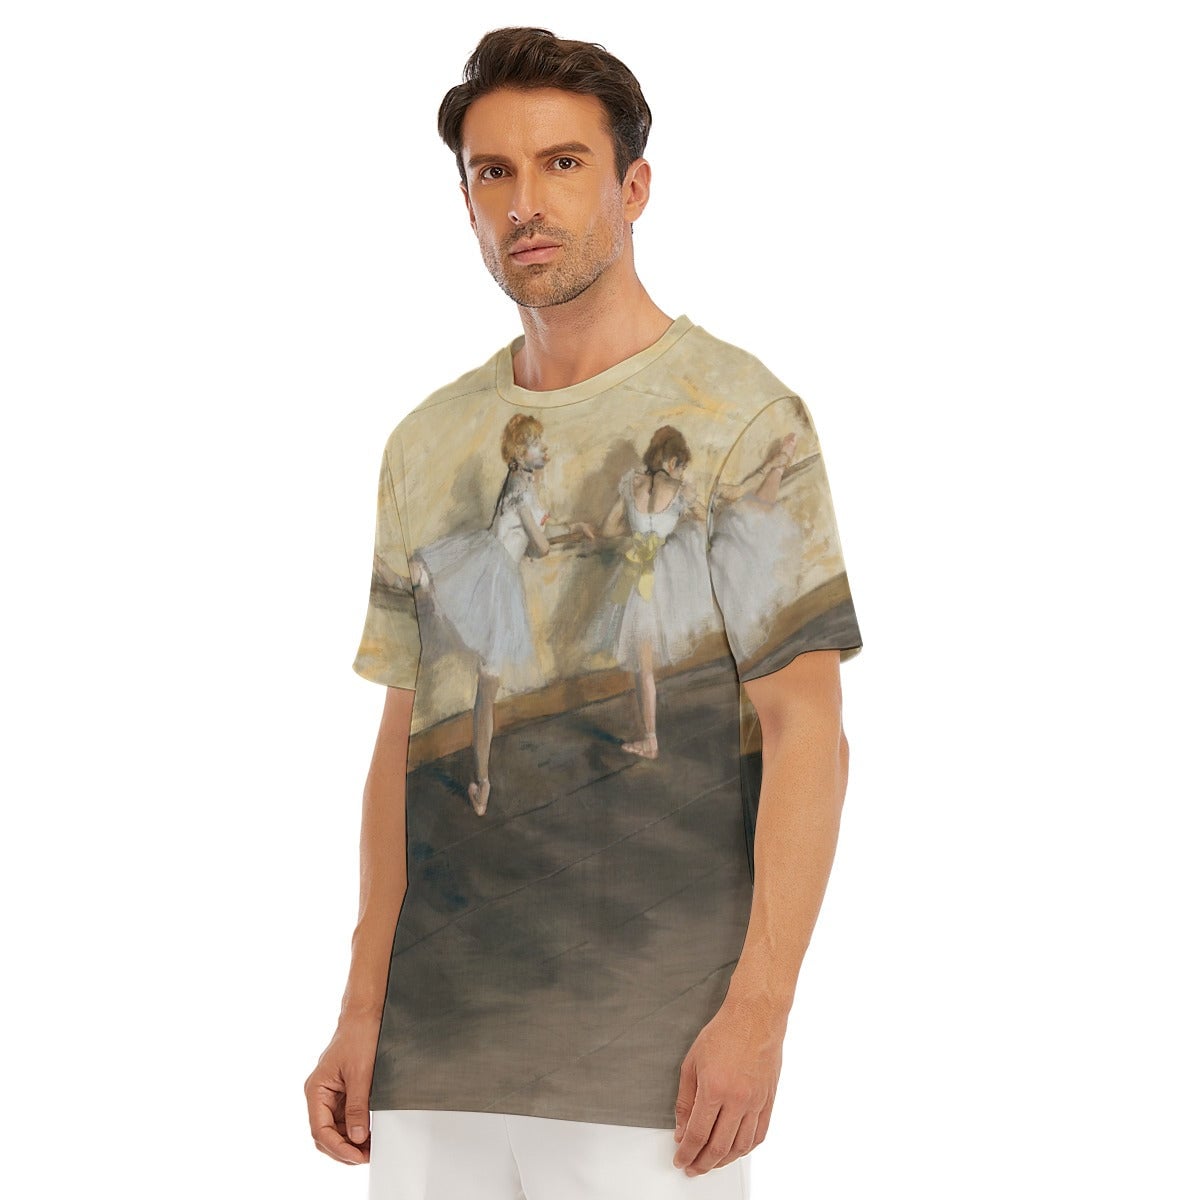 Dancers Practicing at the Barre by Edgar Degas T-Shirt